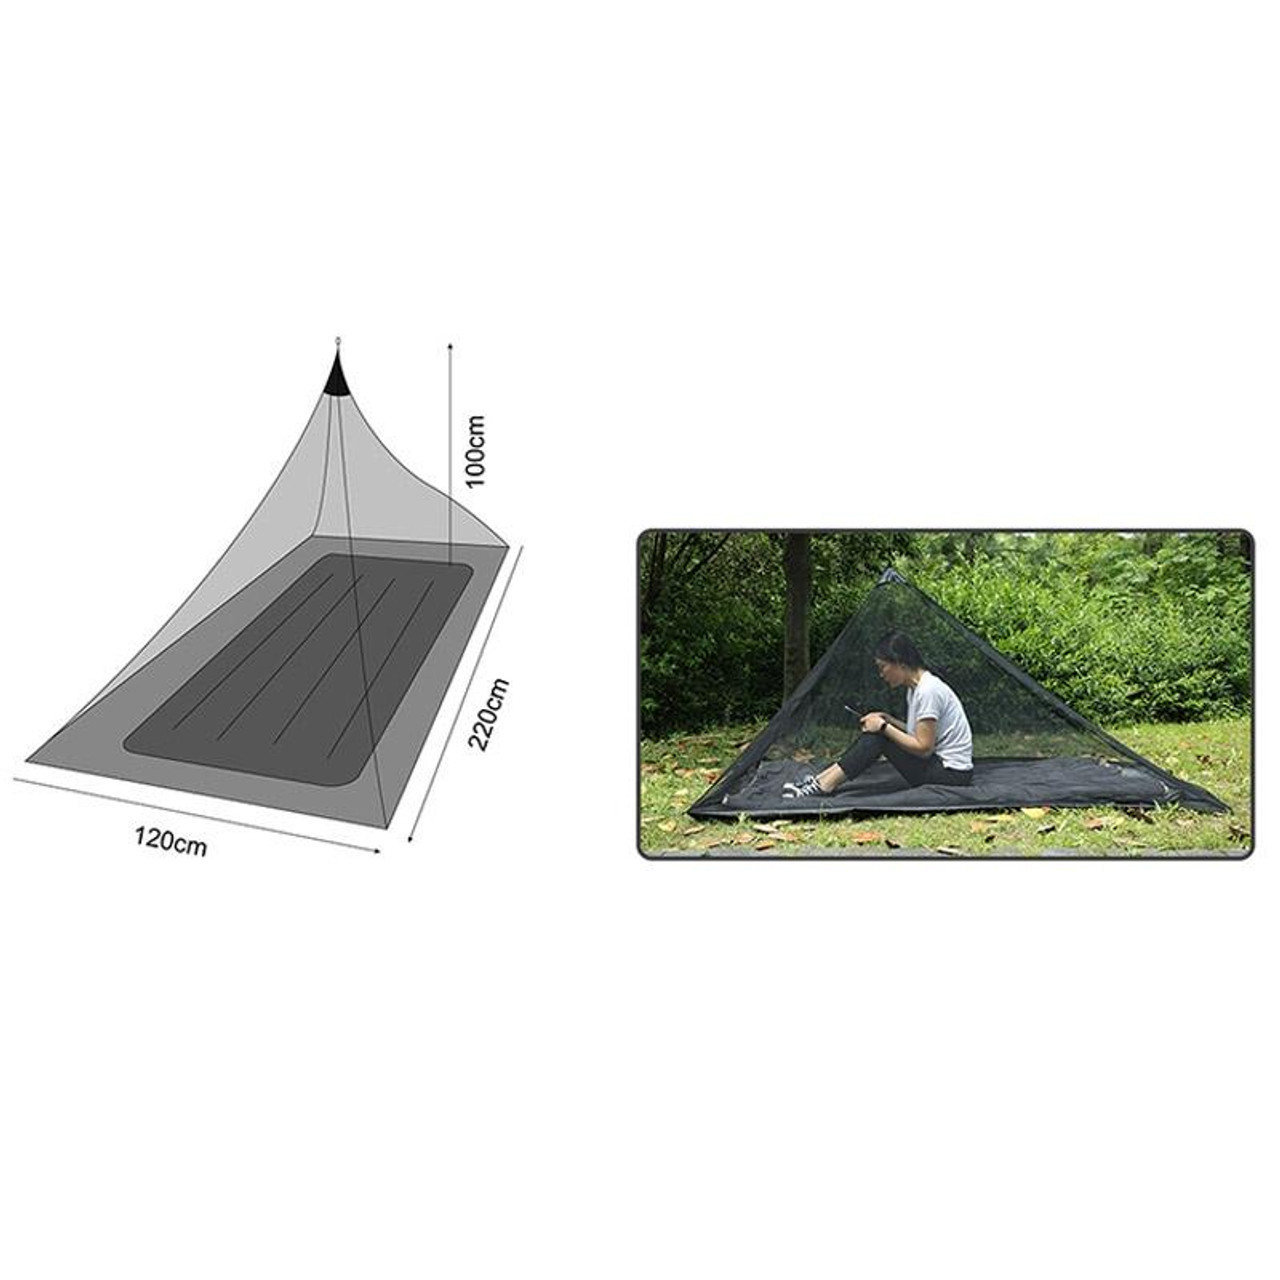 Polyester Mesh Tent Outdoor Camping Single Perspective Anti-Mosquito Net(Black),  snatcher